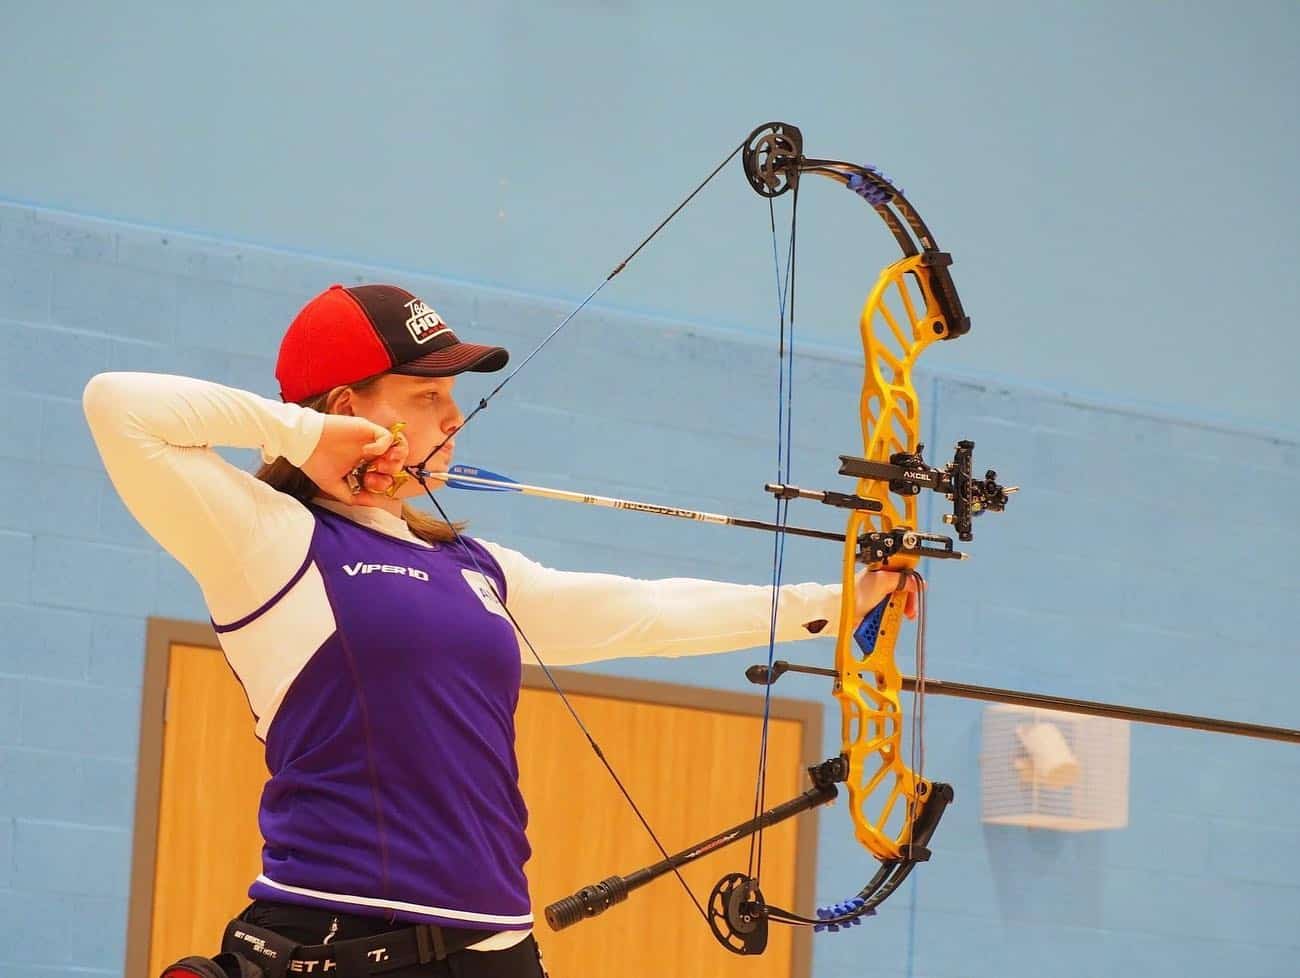 Youth compound archers to watch this season